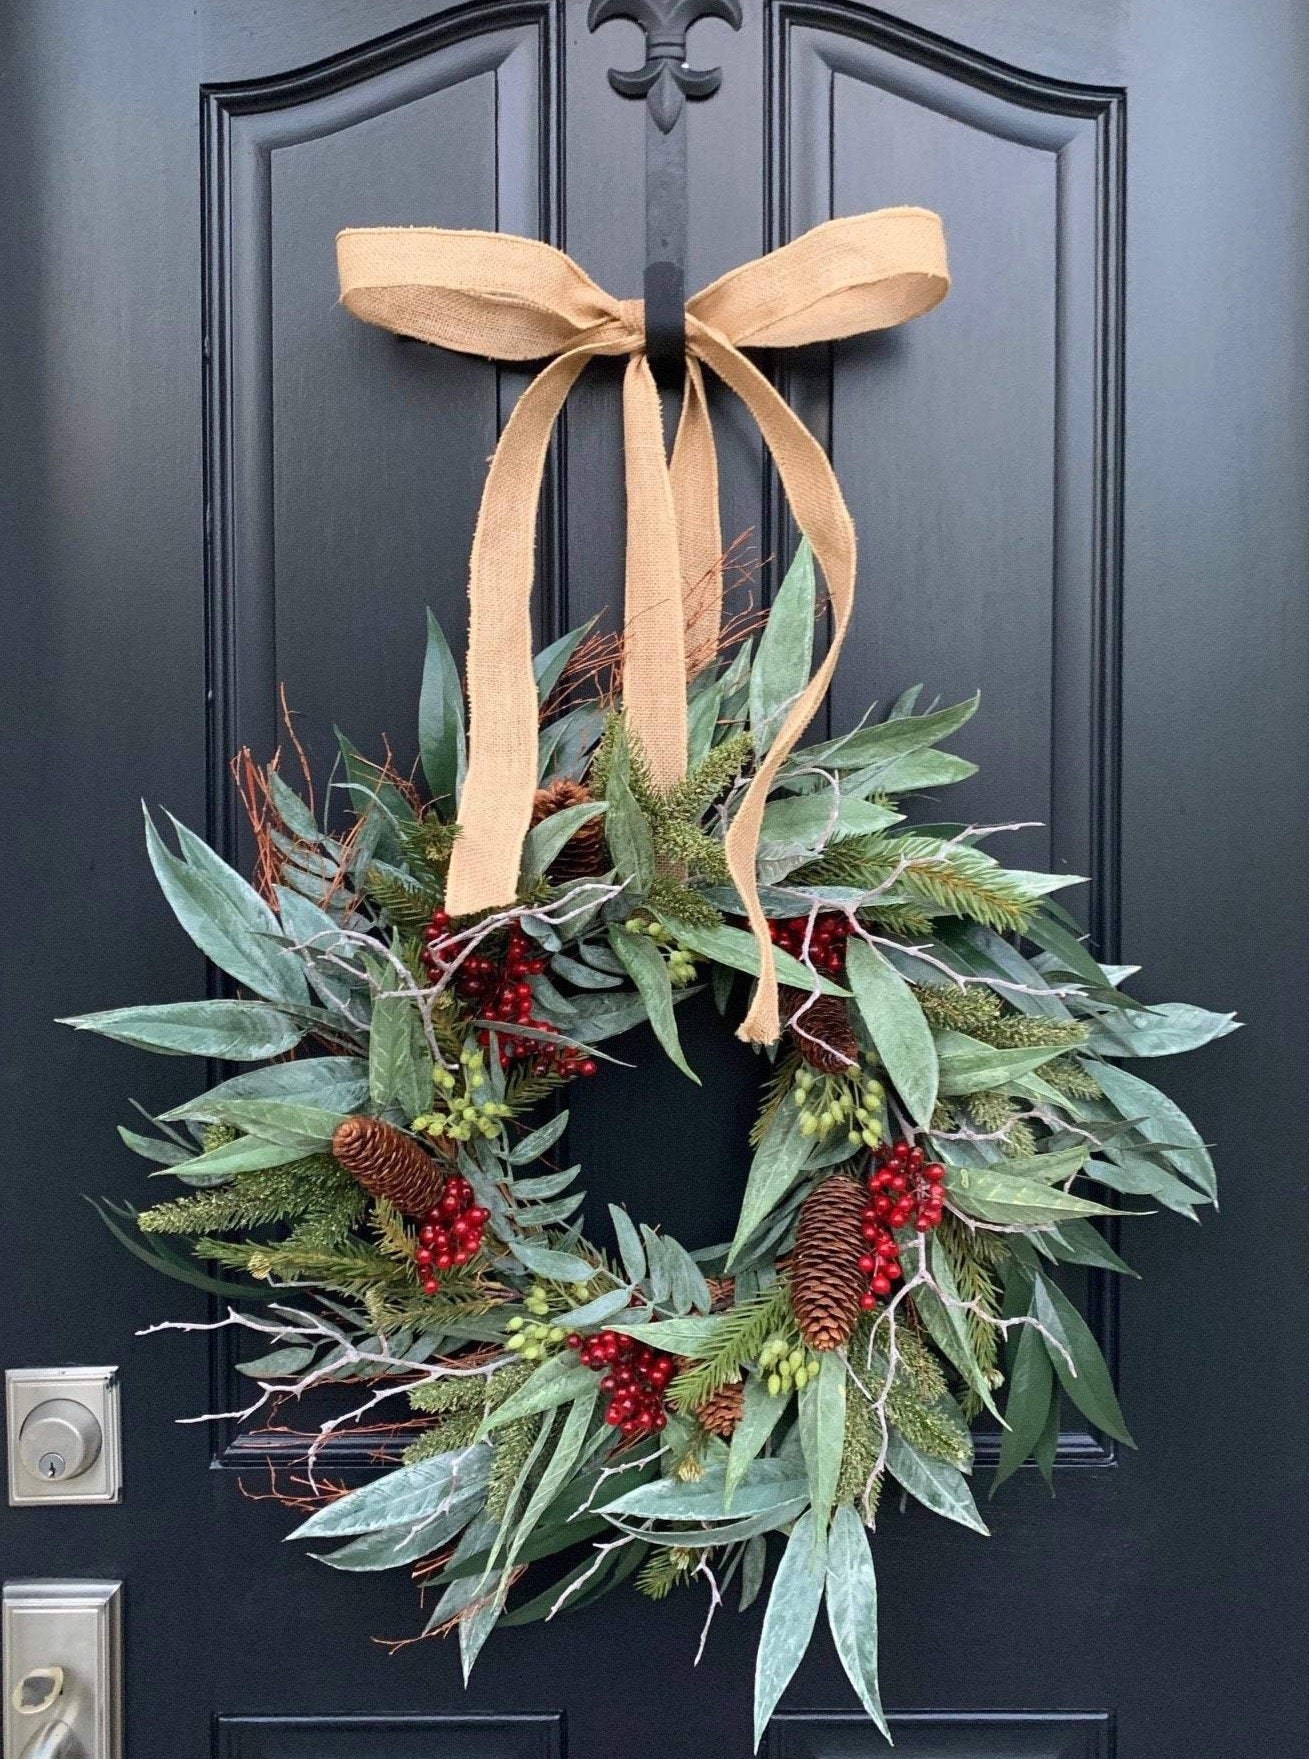 Woodsy Winter Wreath with Pinecones